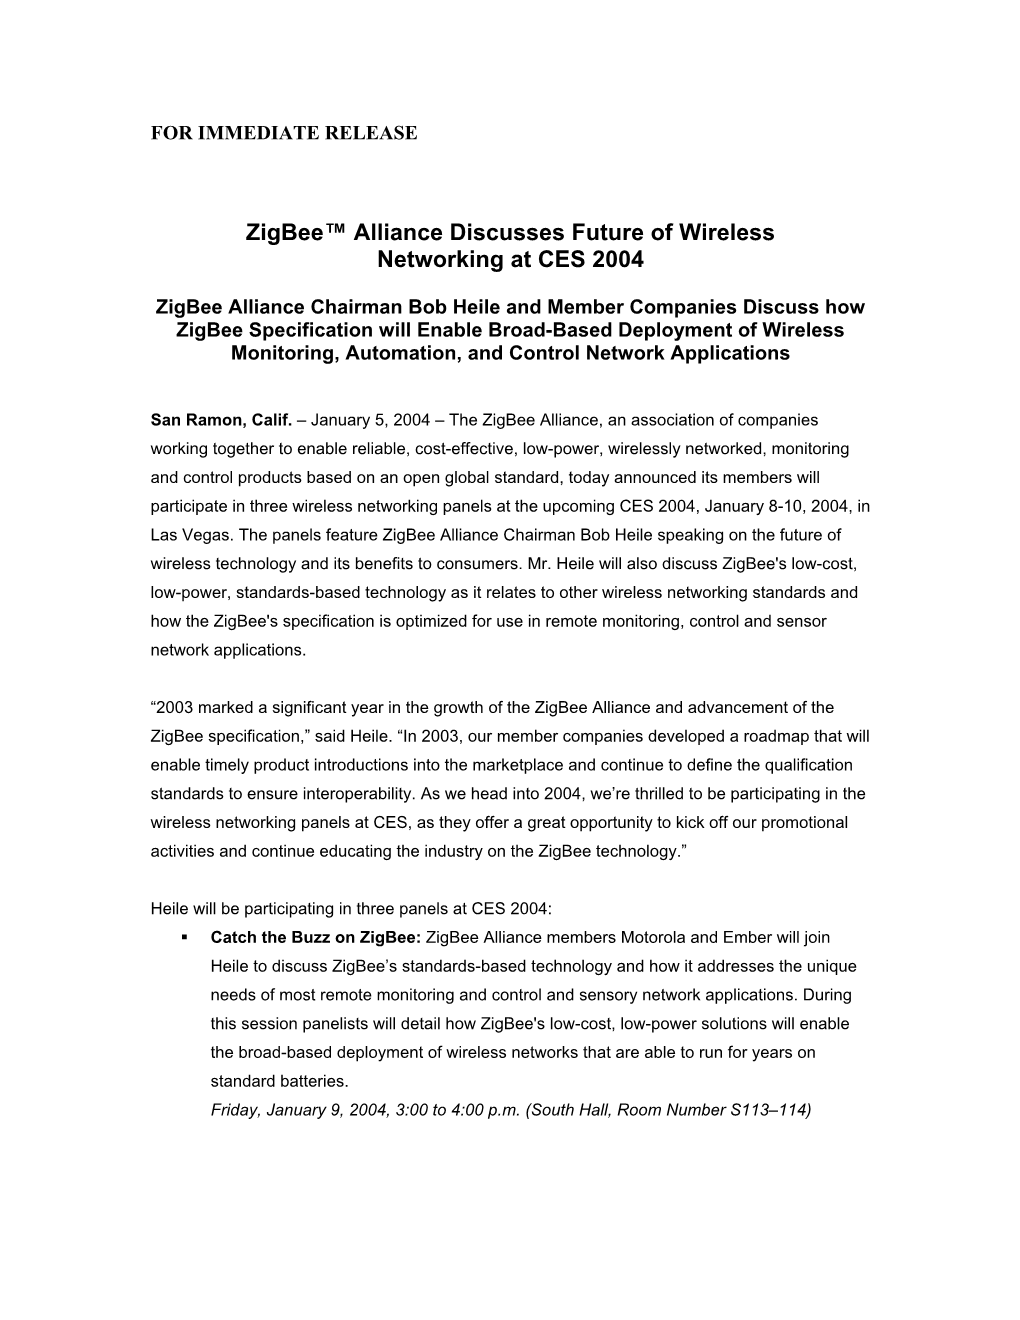 Zigbee™ Alliance Discusses Future of Wireless Networking at CES 2004